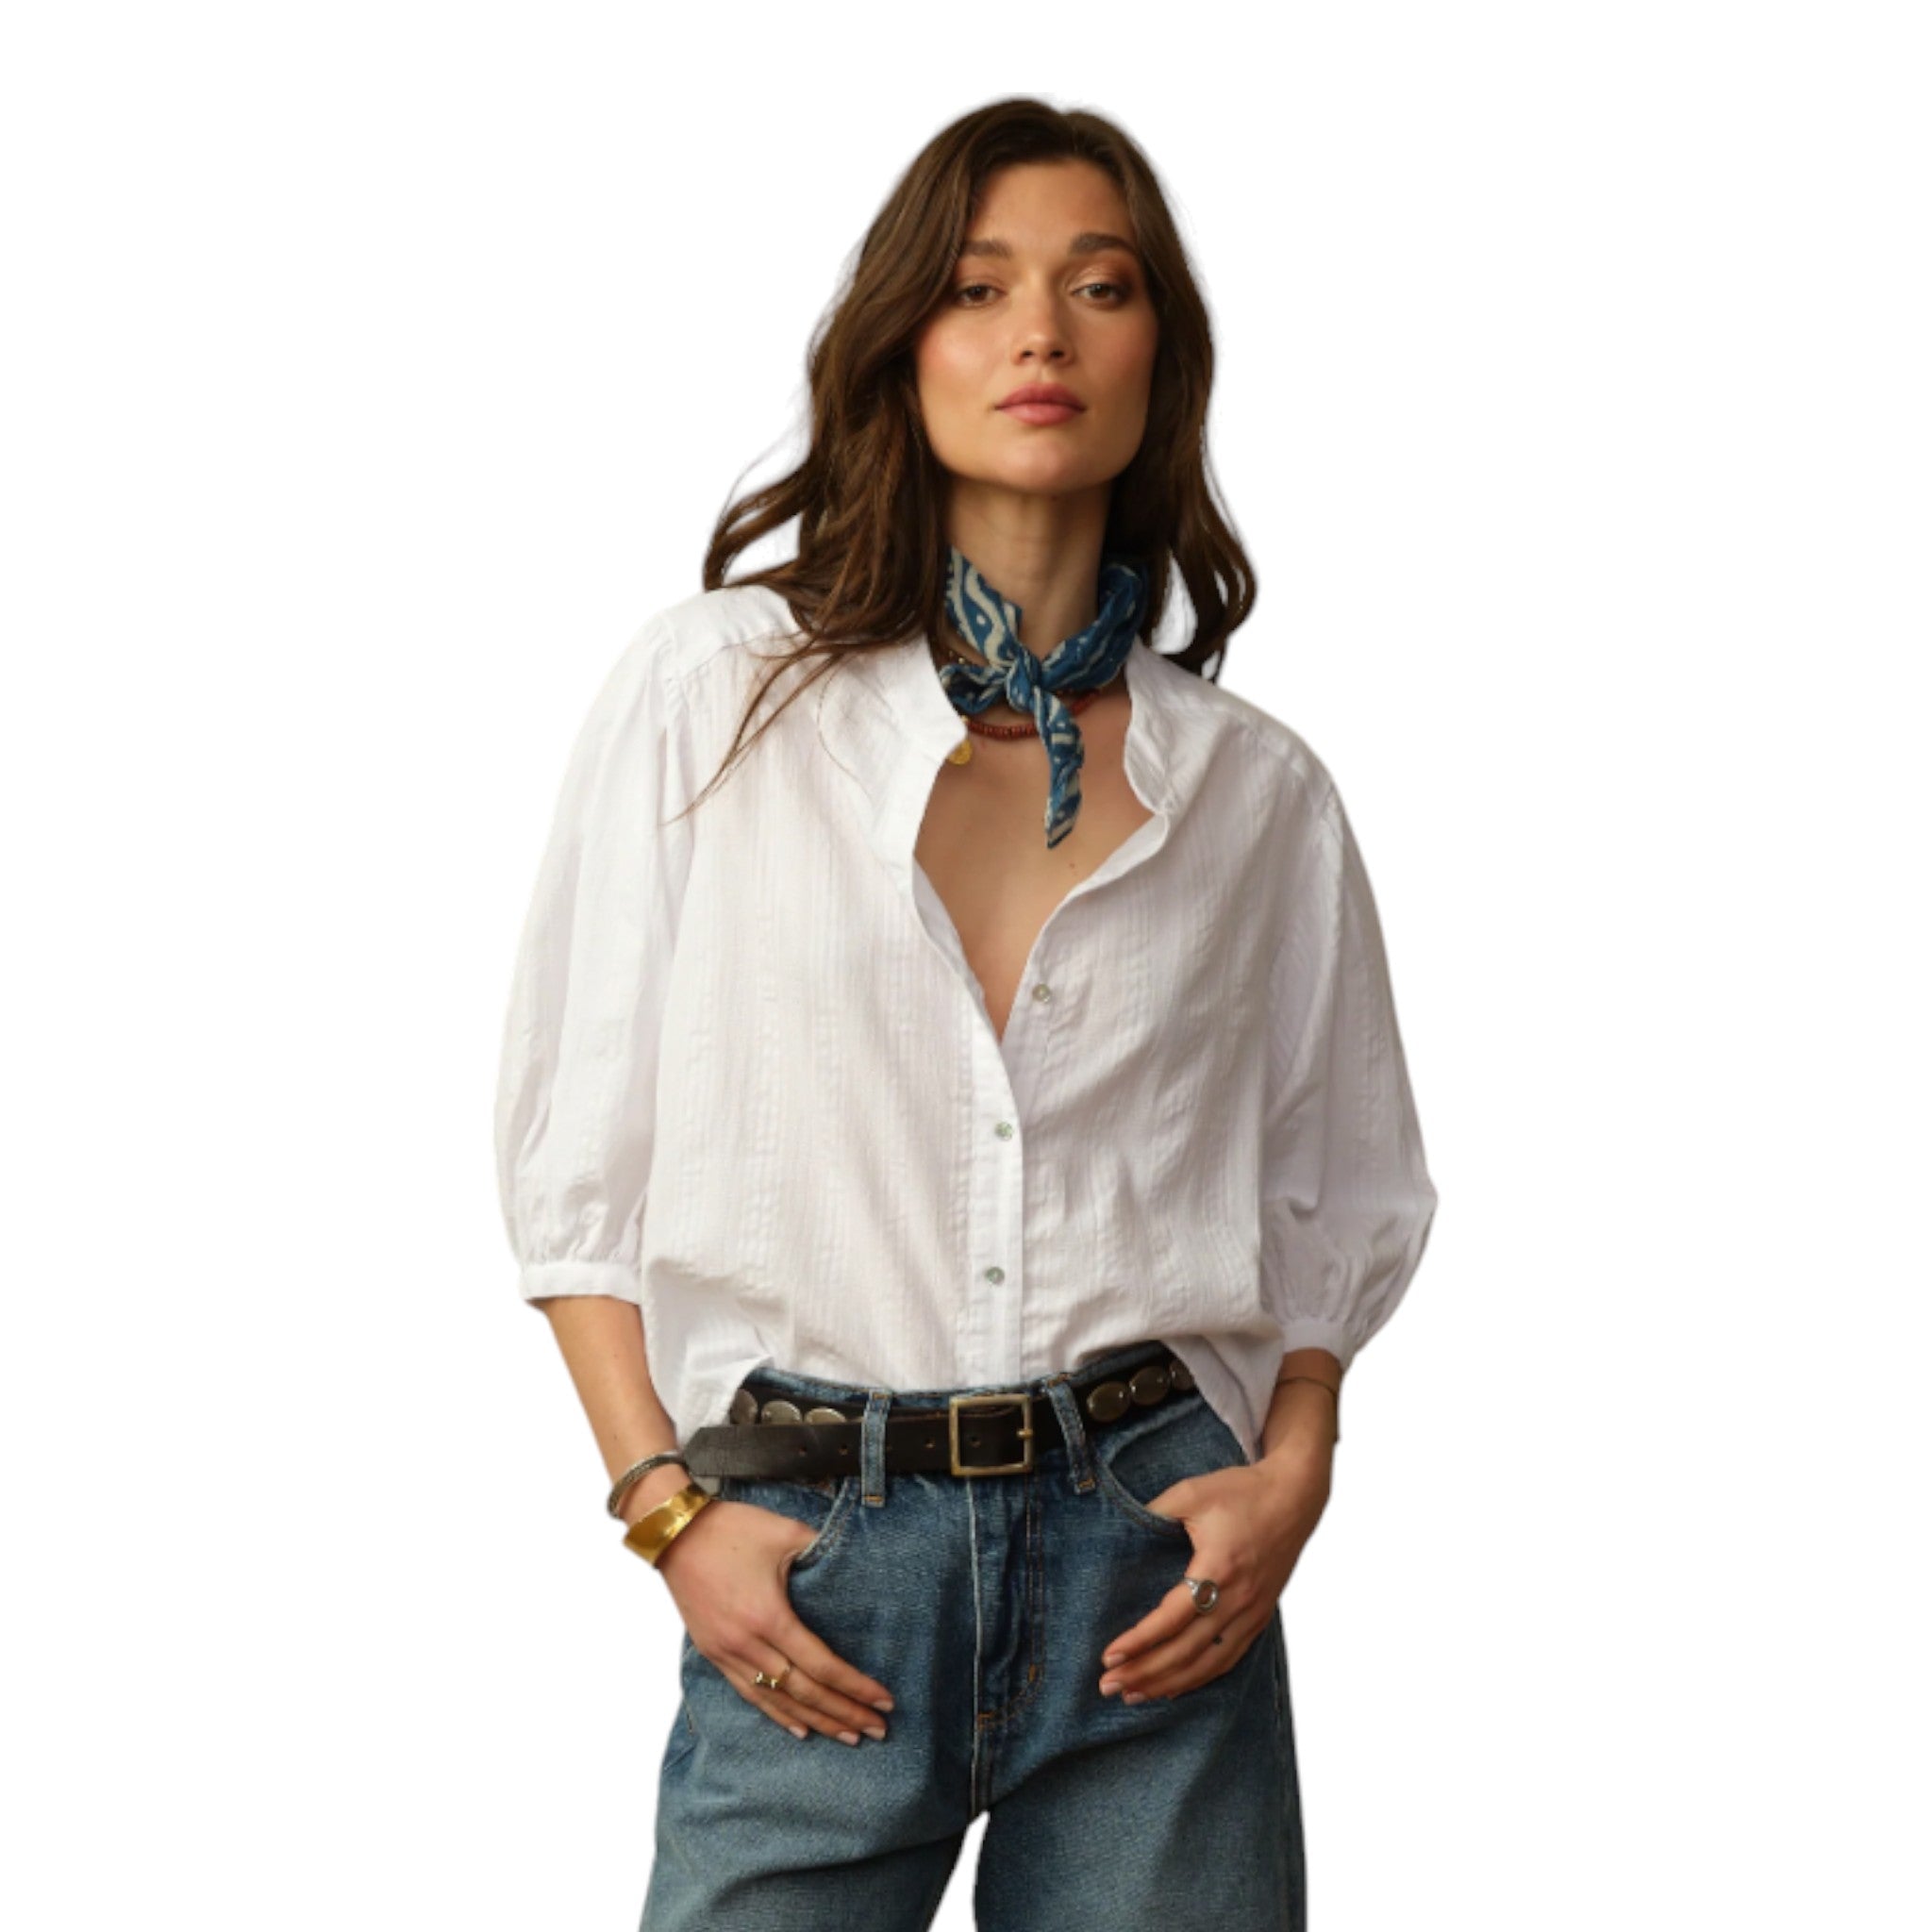 white button up organic cotton blouse with puff 3 quarter sleeves with a subtle stripe detailing